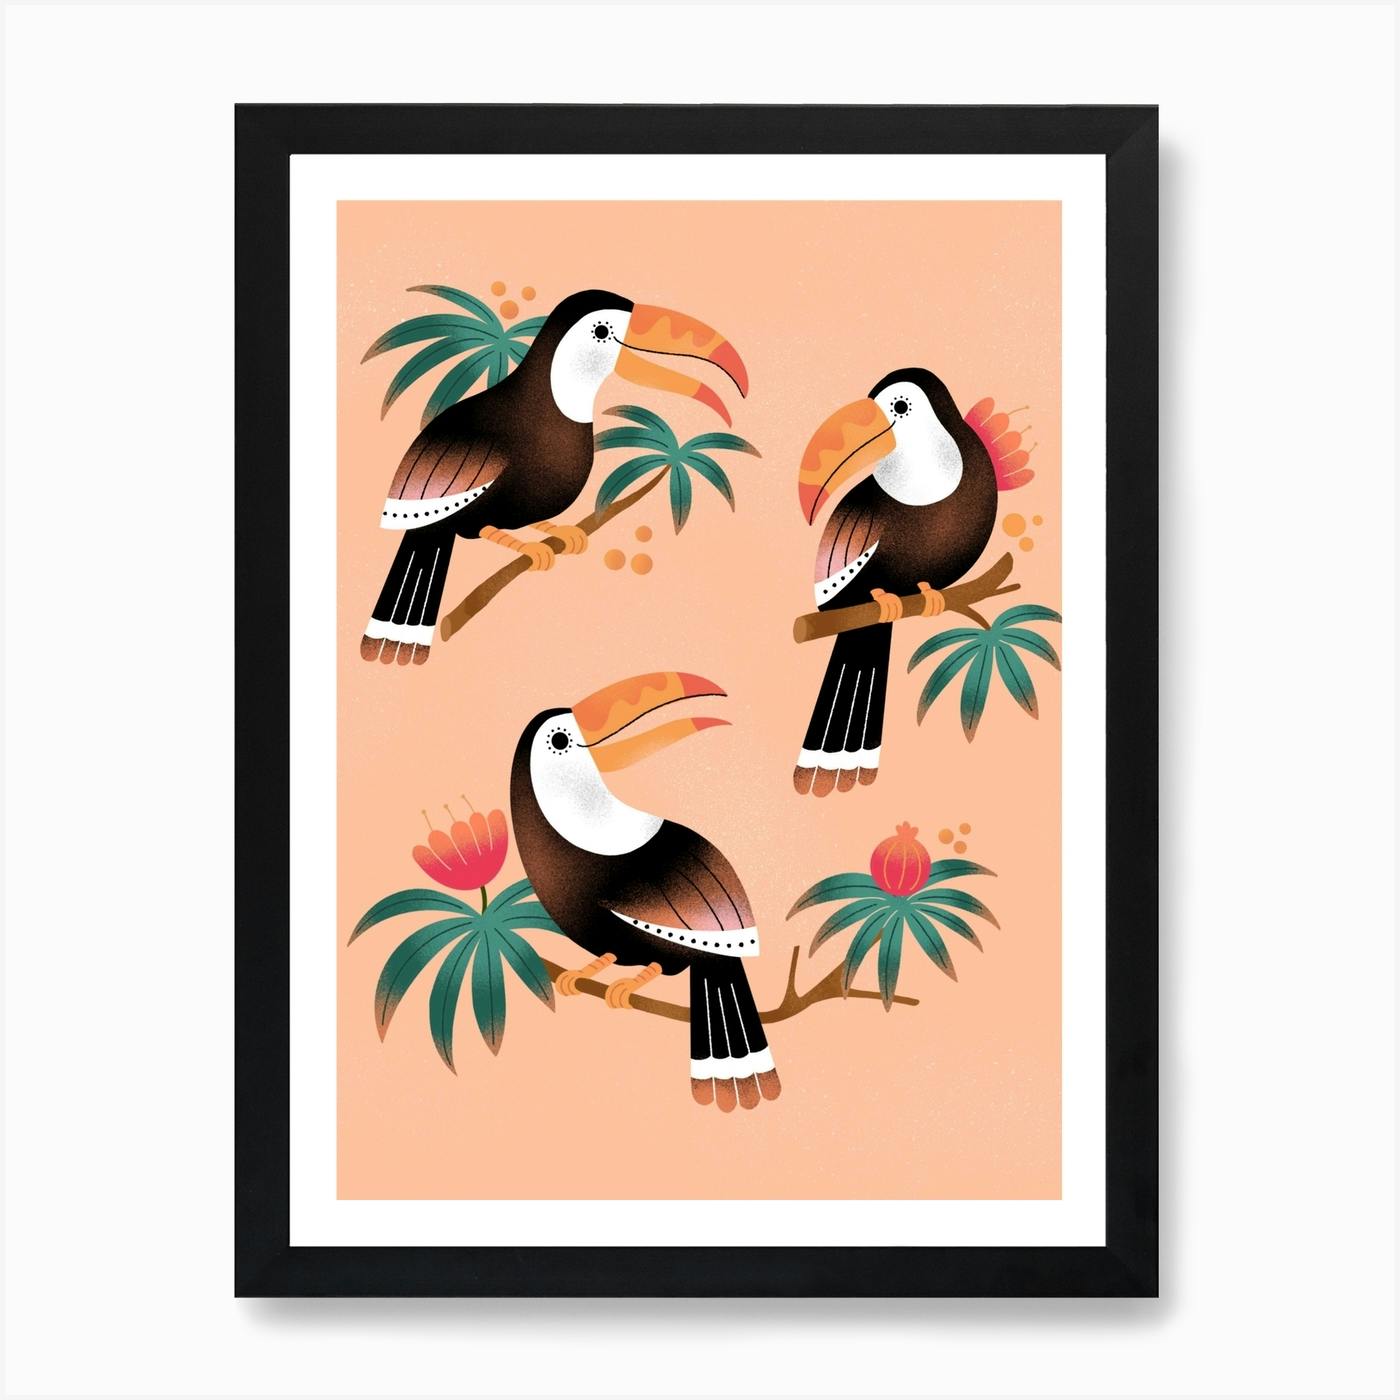 Gossiping　by　Jess　Miller　Draws　Toucan　Trio　Print　Art　Fy